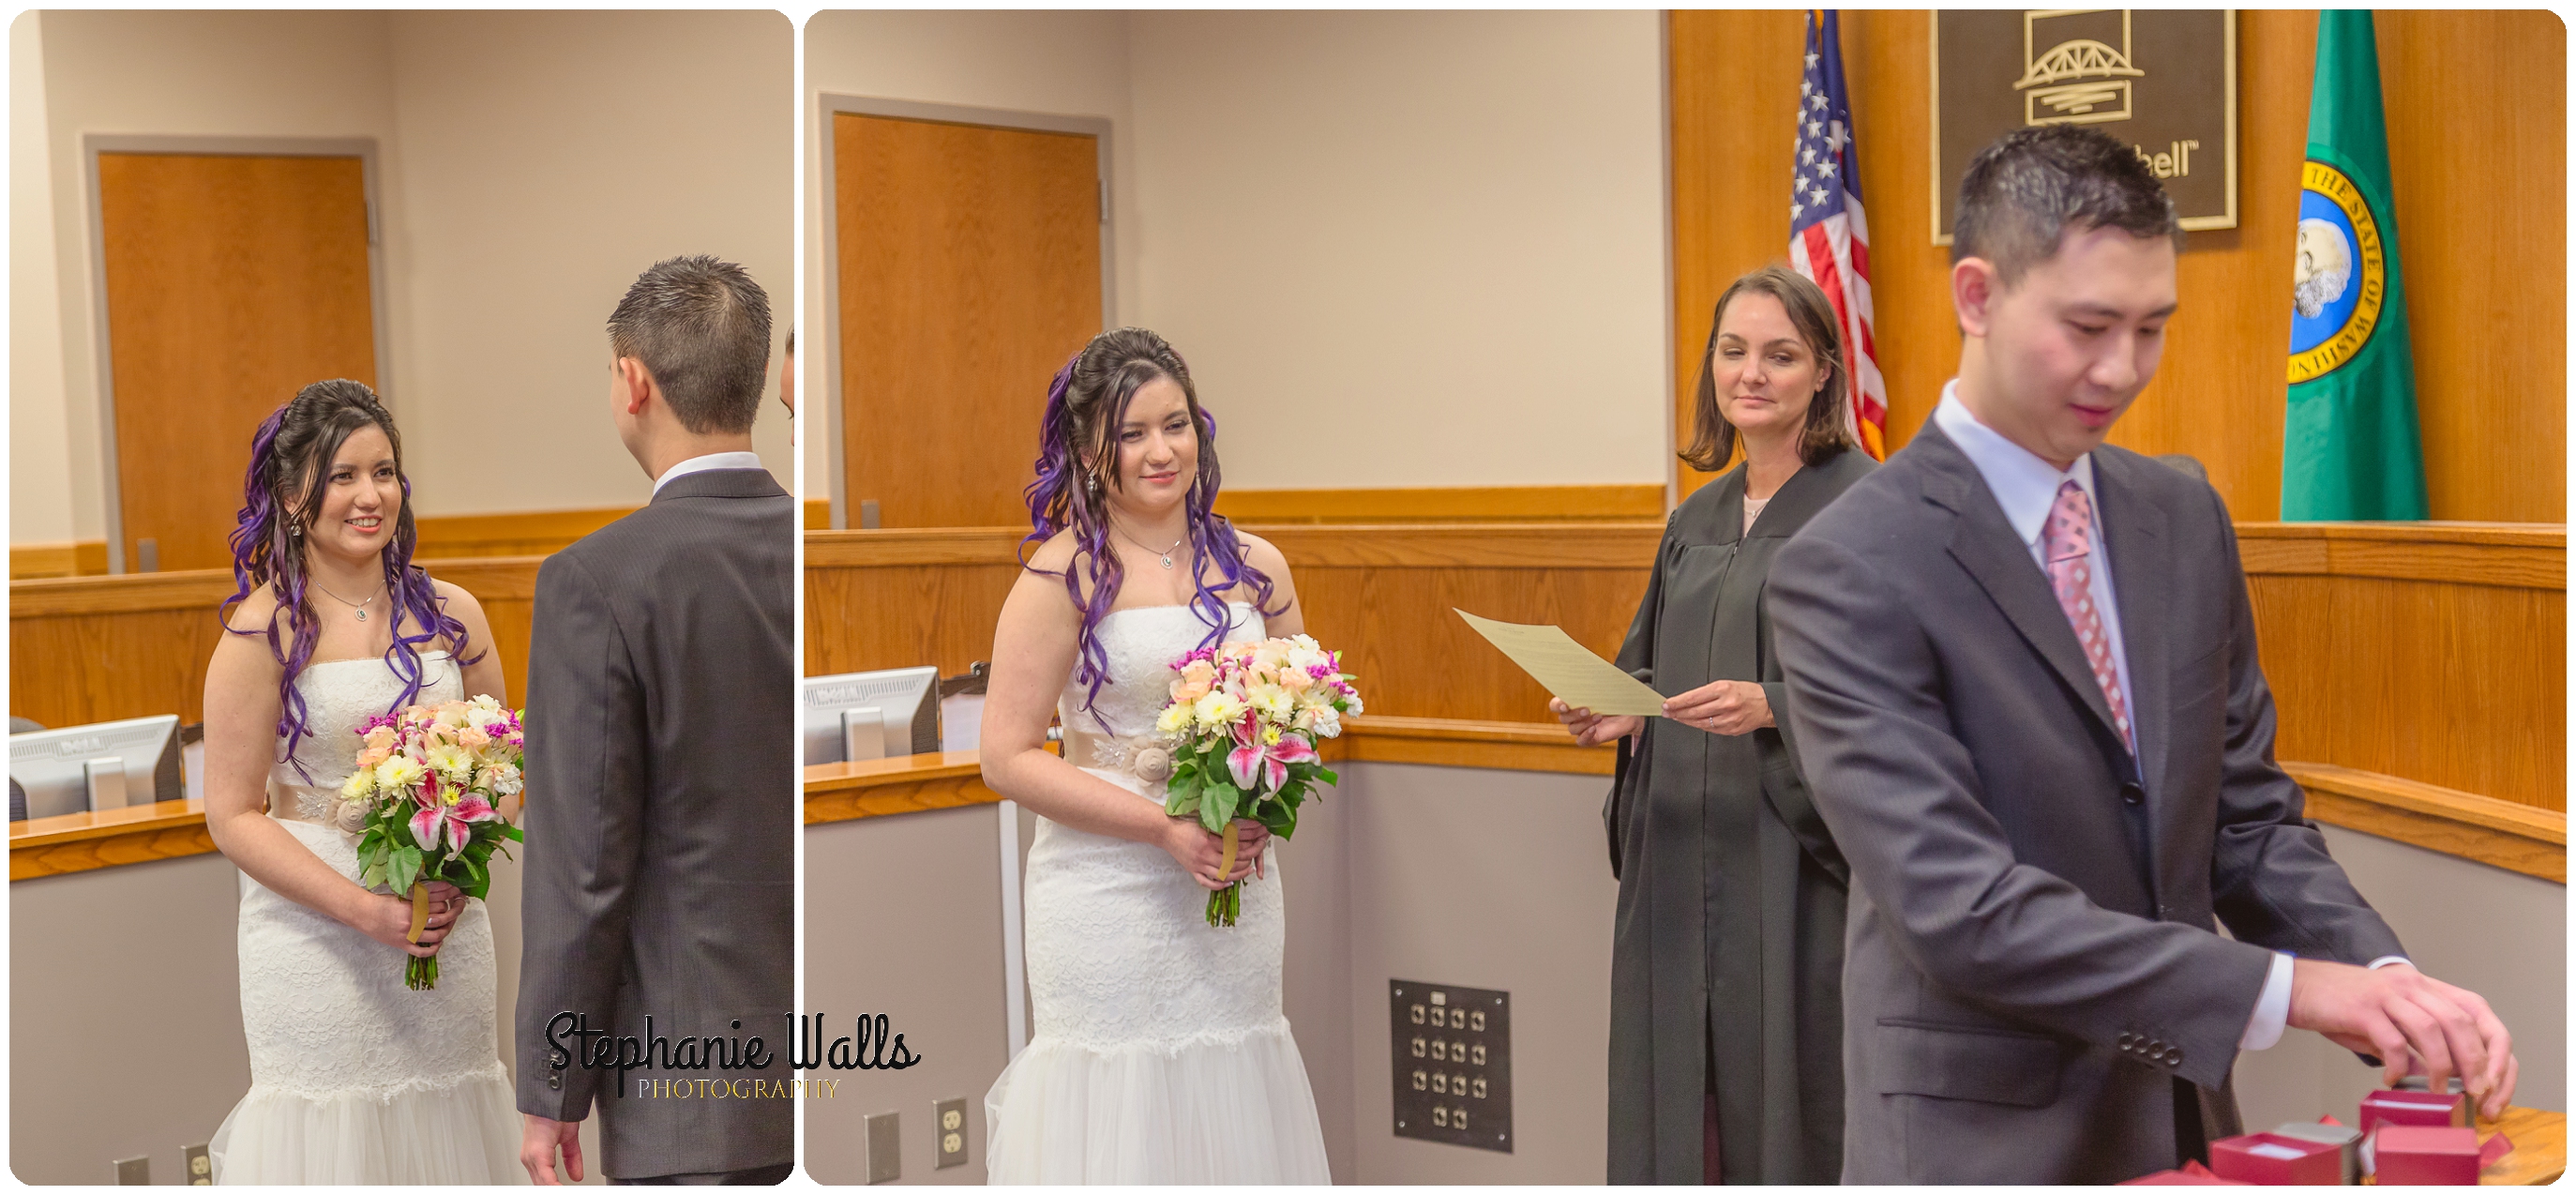 Chan Wedding 049 1 LAUGHTER AND LACE | BOTHELL COURTHOUSE WEDDING BOTHELL WA